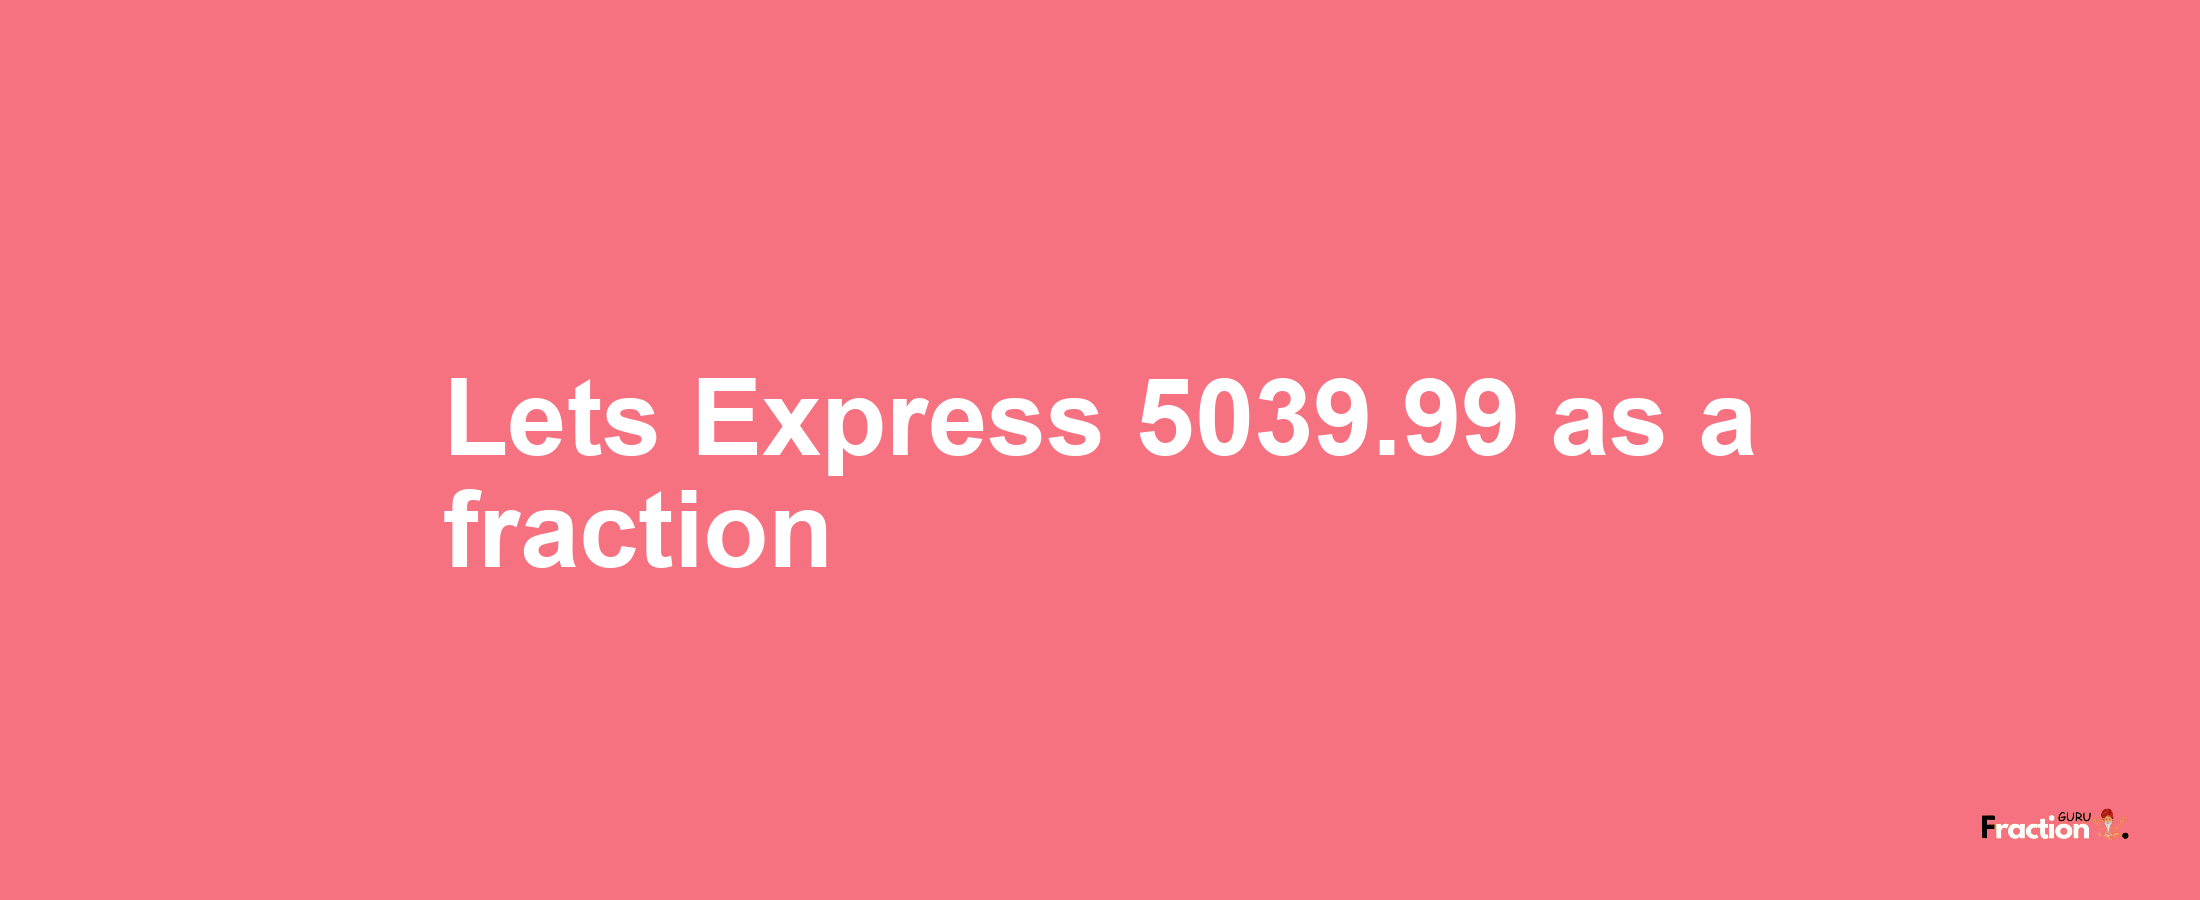 Lets Express 5039.99 as afraction